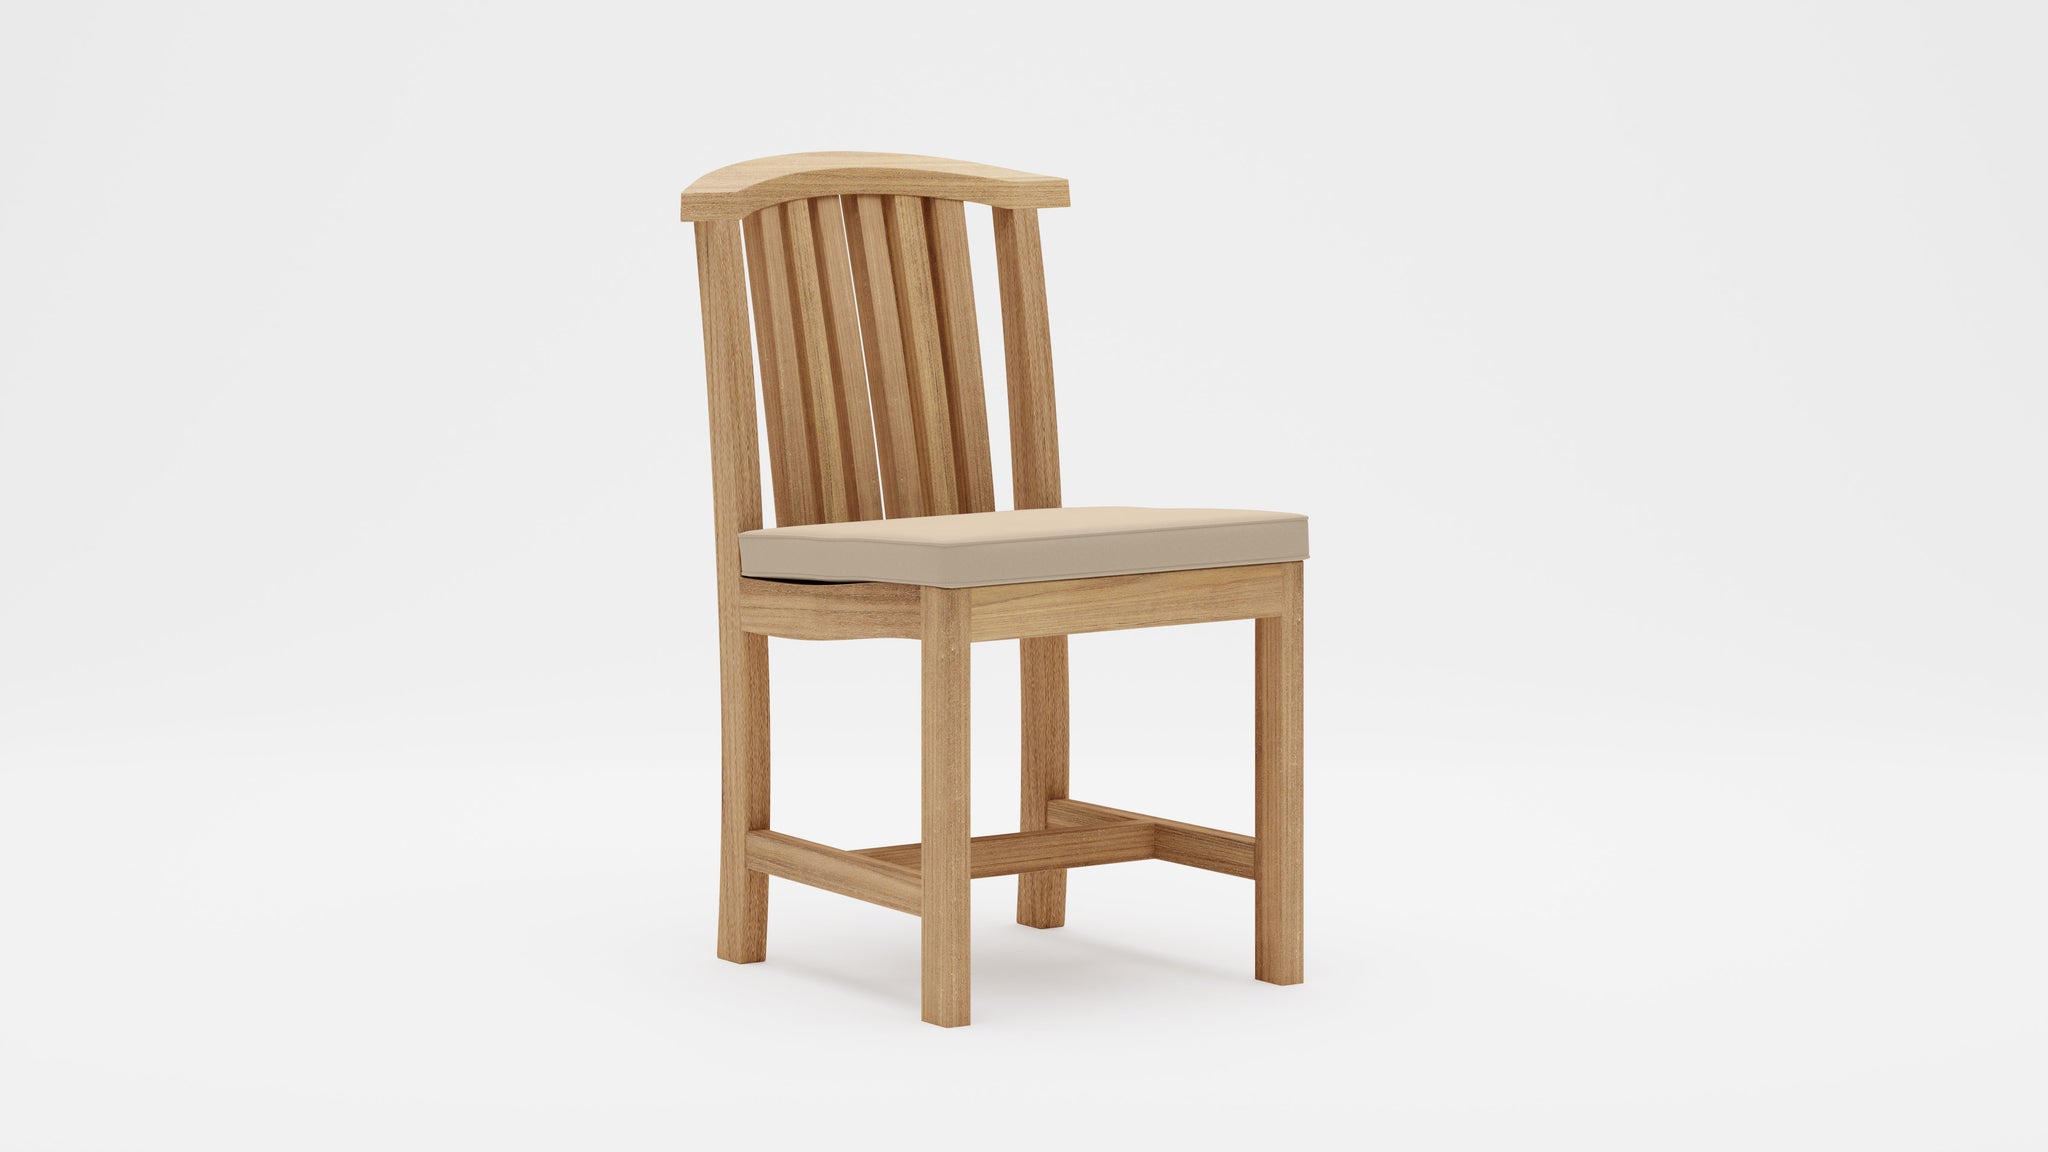 Winchester Dining Chair with Ecru Cushion